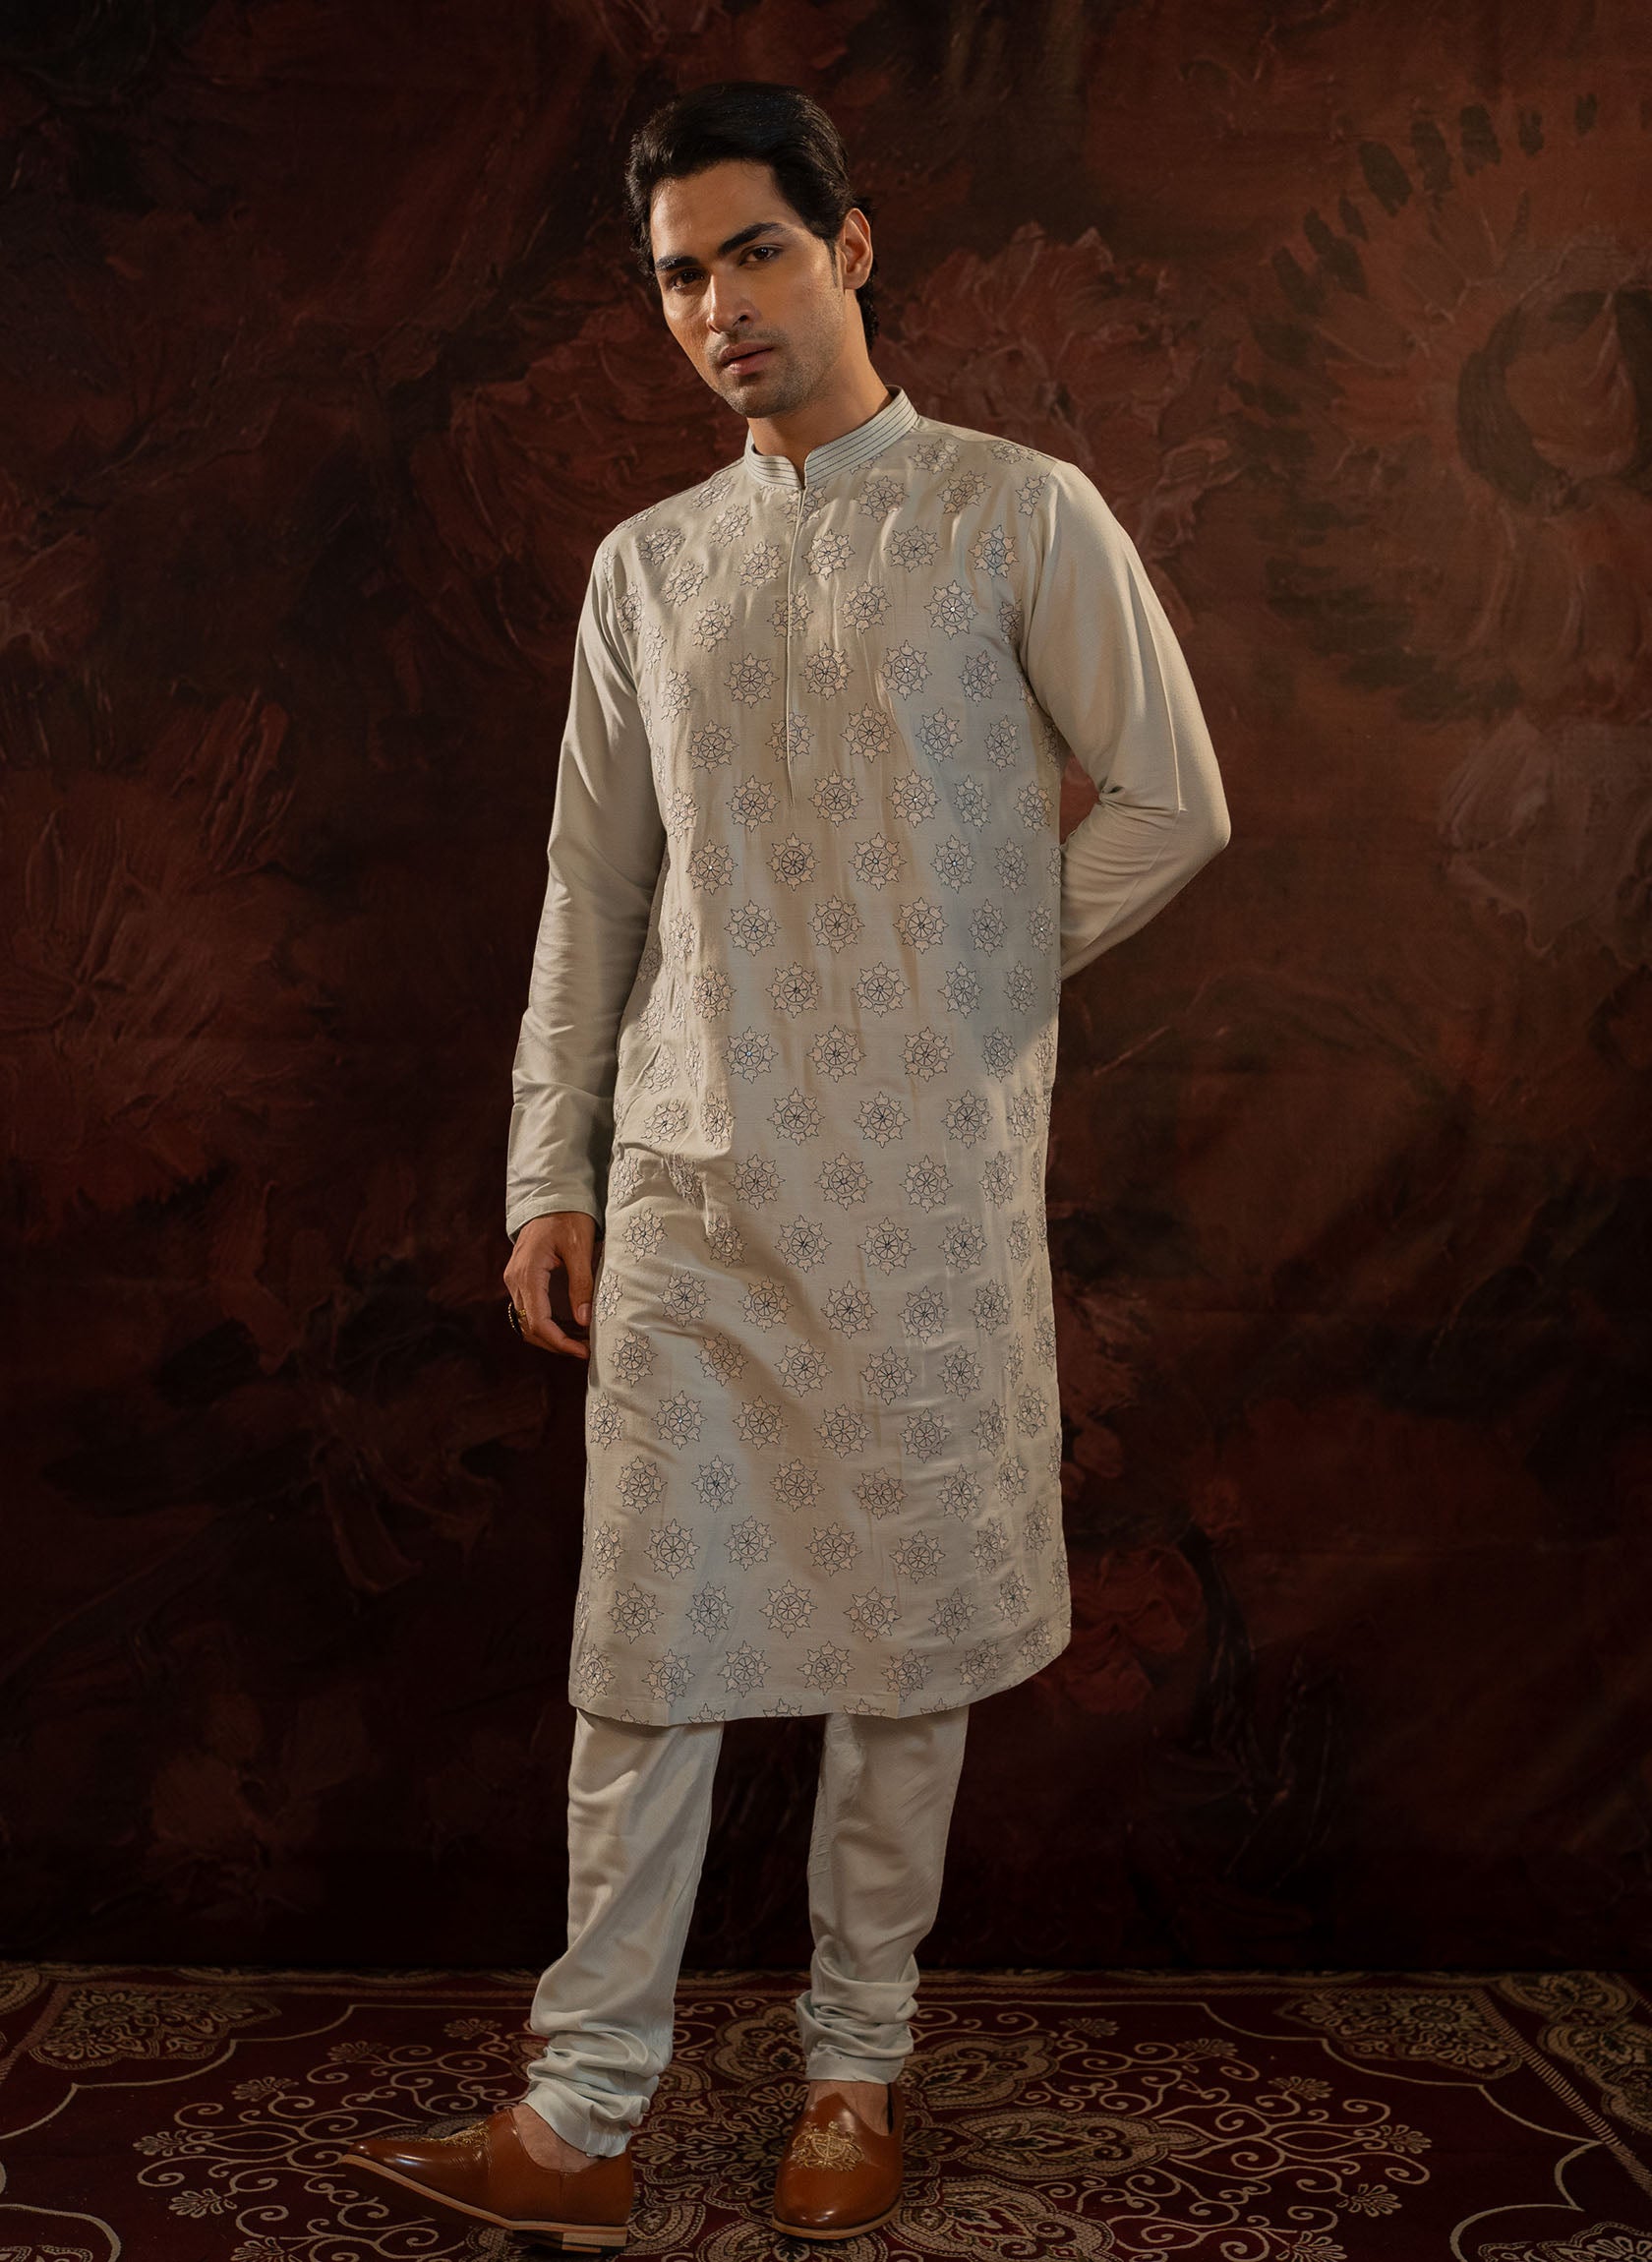 Powder blue cotton silk kurta set with floral embroidered motifs all over. Stitchline detailing on the collar. Comes with churidar.